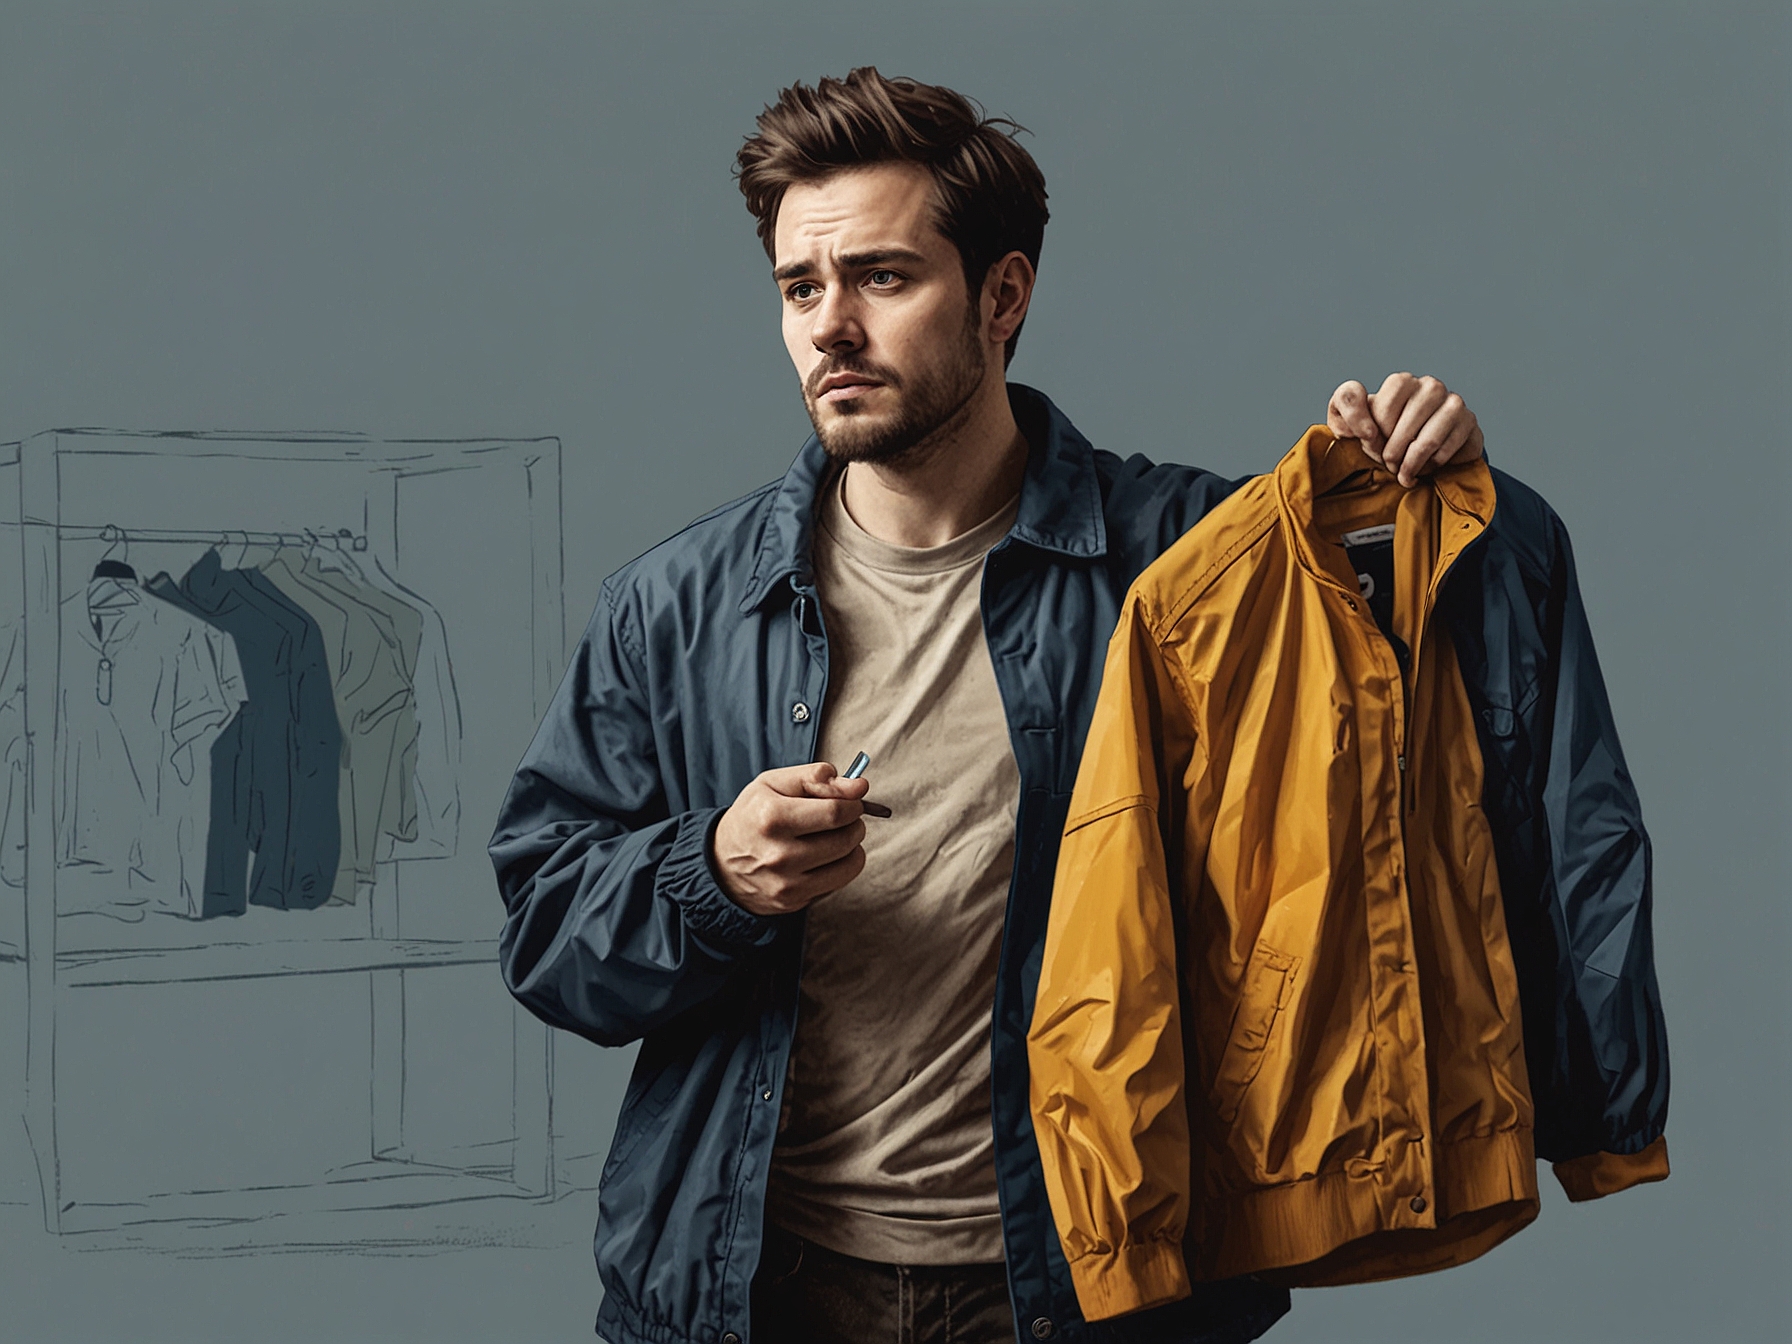 A person looking frustrated as they hold a newly received jacket from an online purchase, highlighting the emotional impact of losing a favorite clothing item.